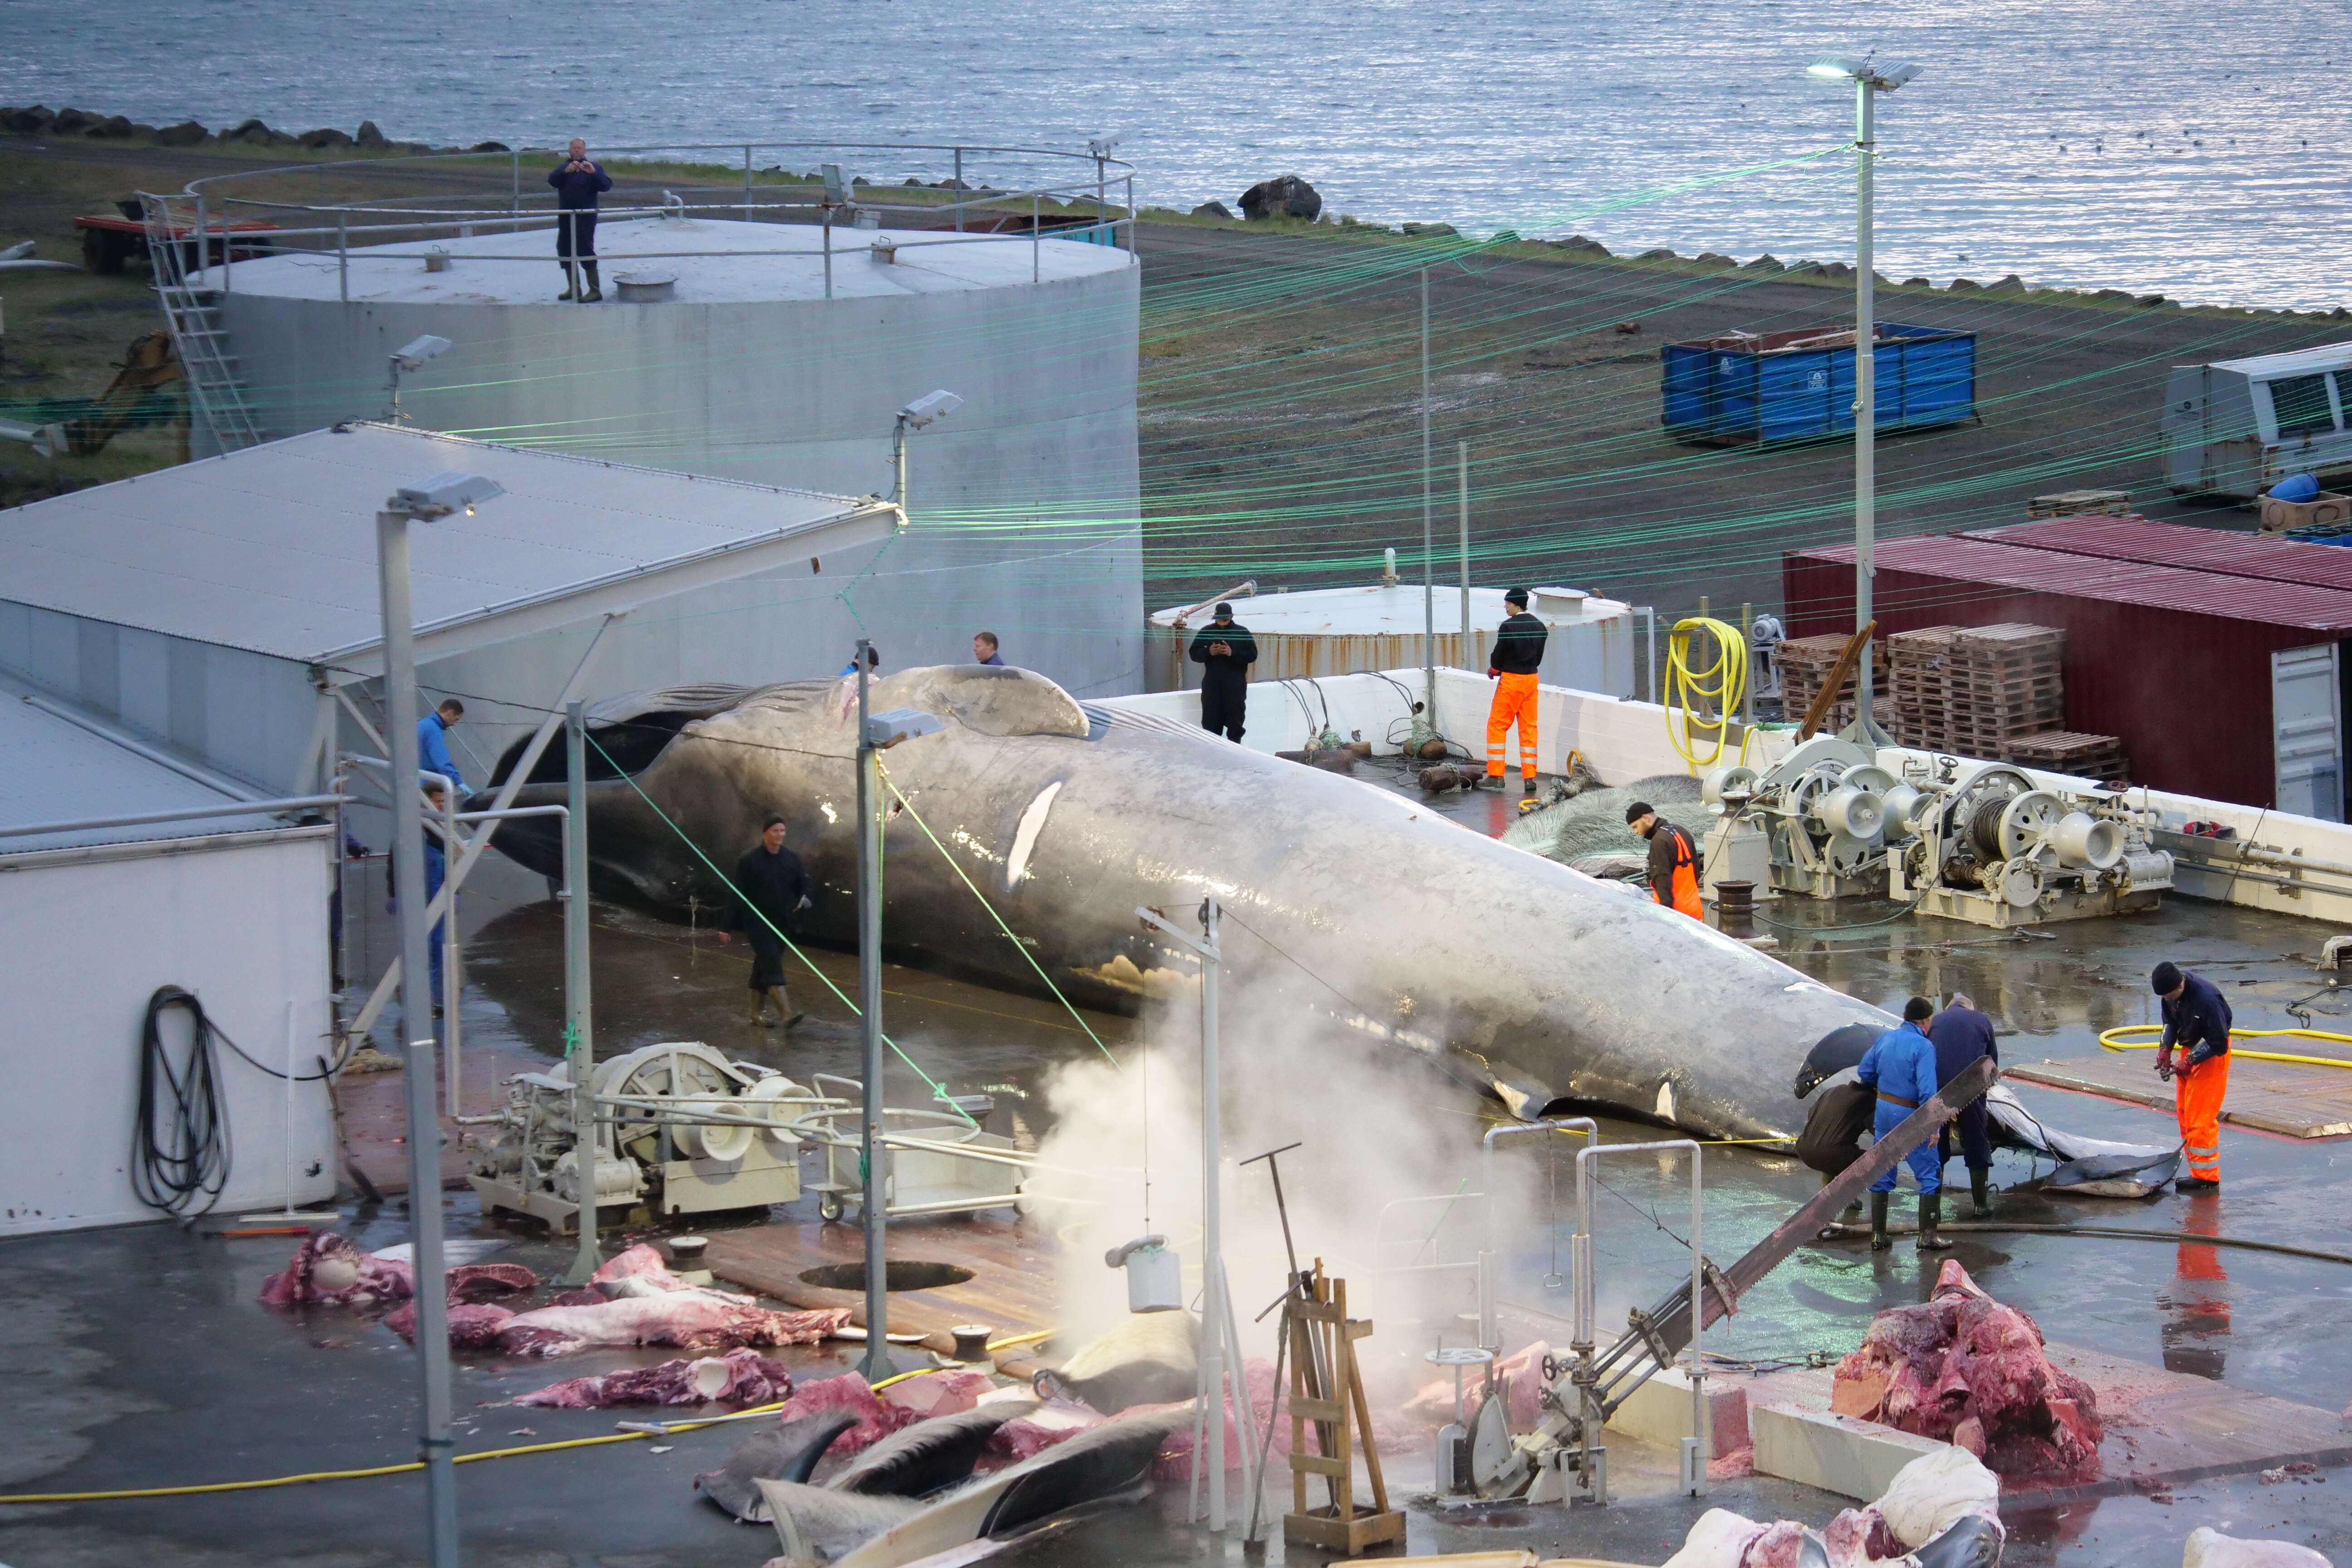 Whalers cutting up whale into parts